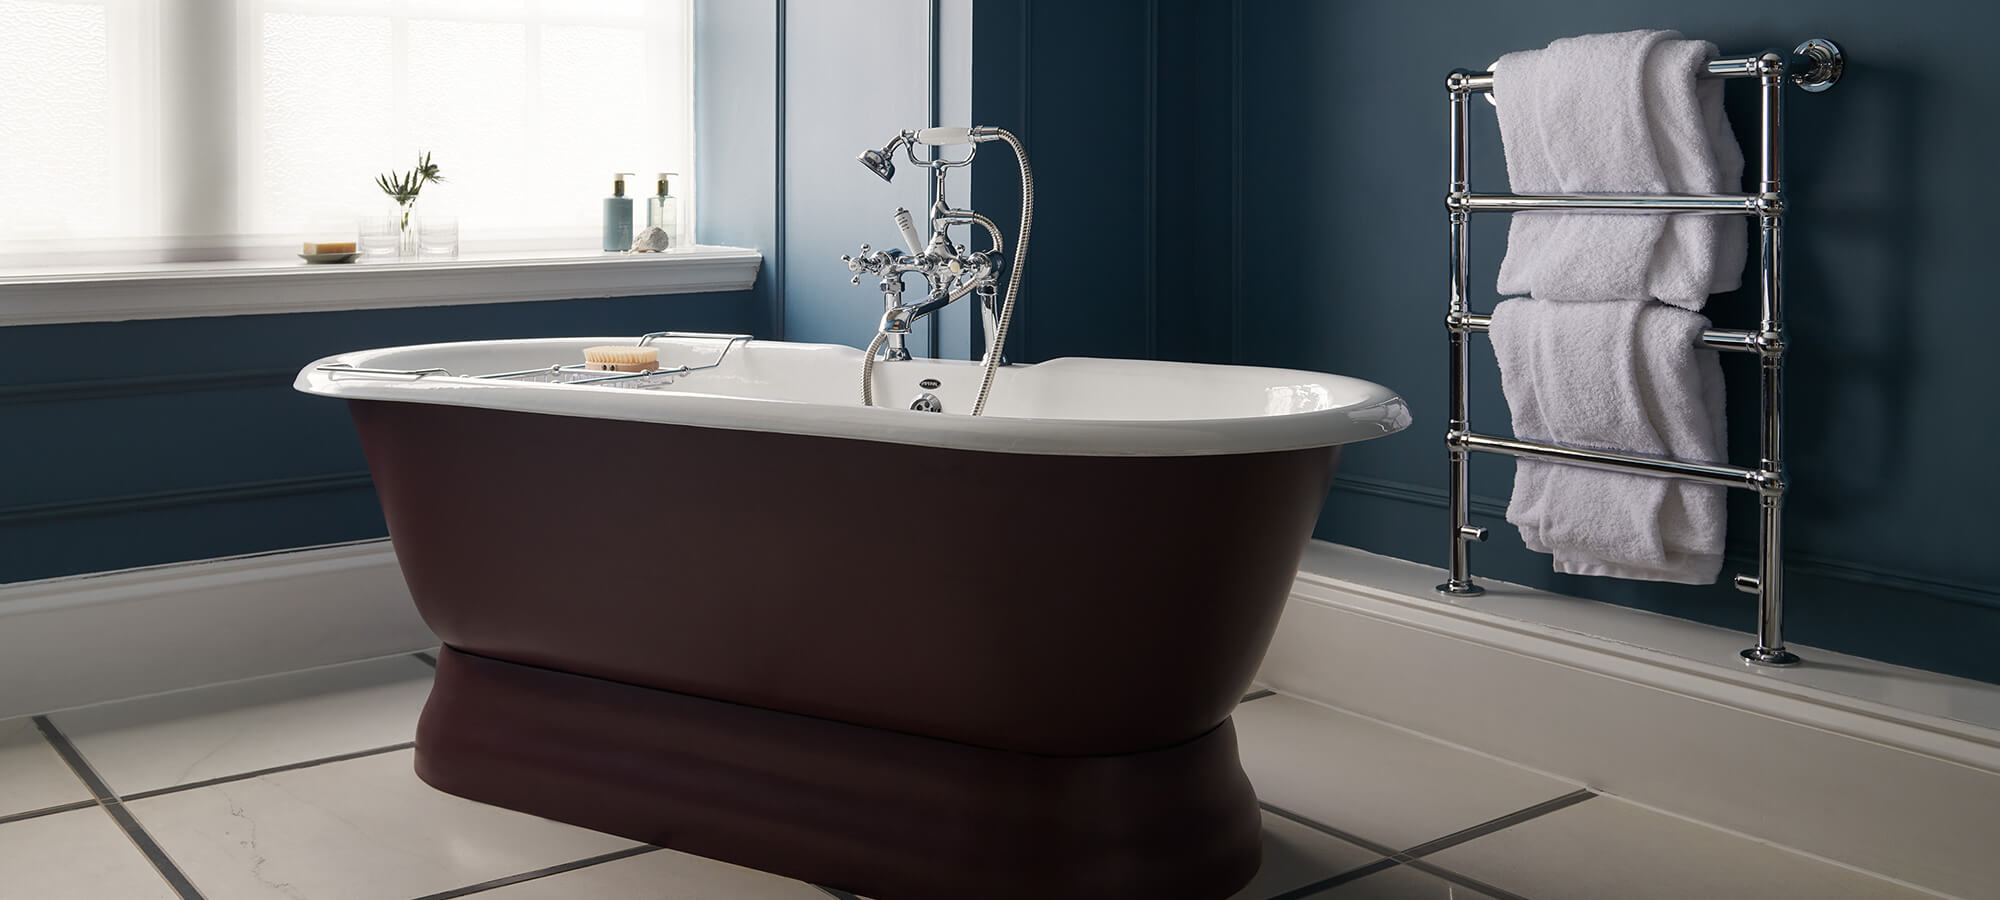 A large plum coloured bfree-standing bathtub in a navy blue bathroom in a Manor room